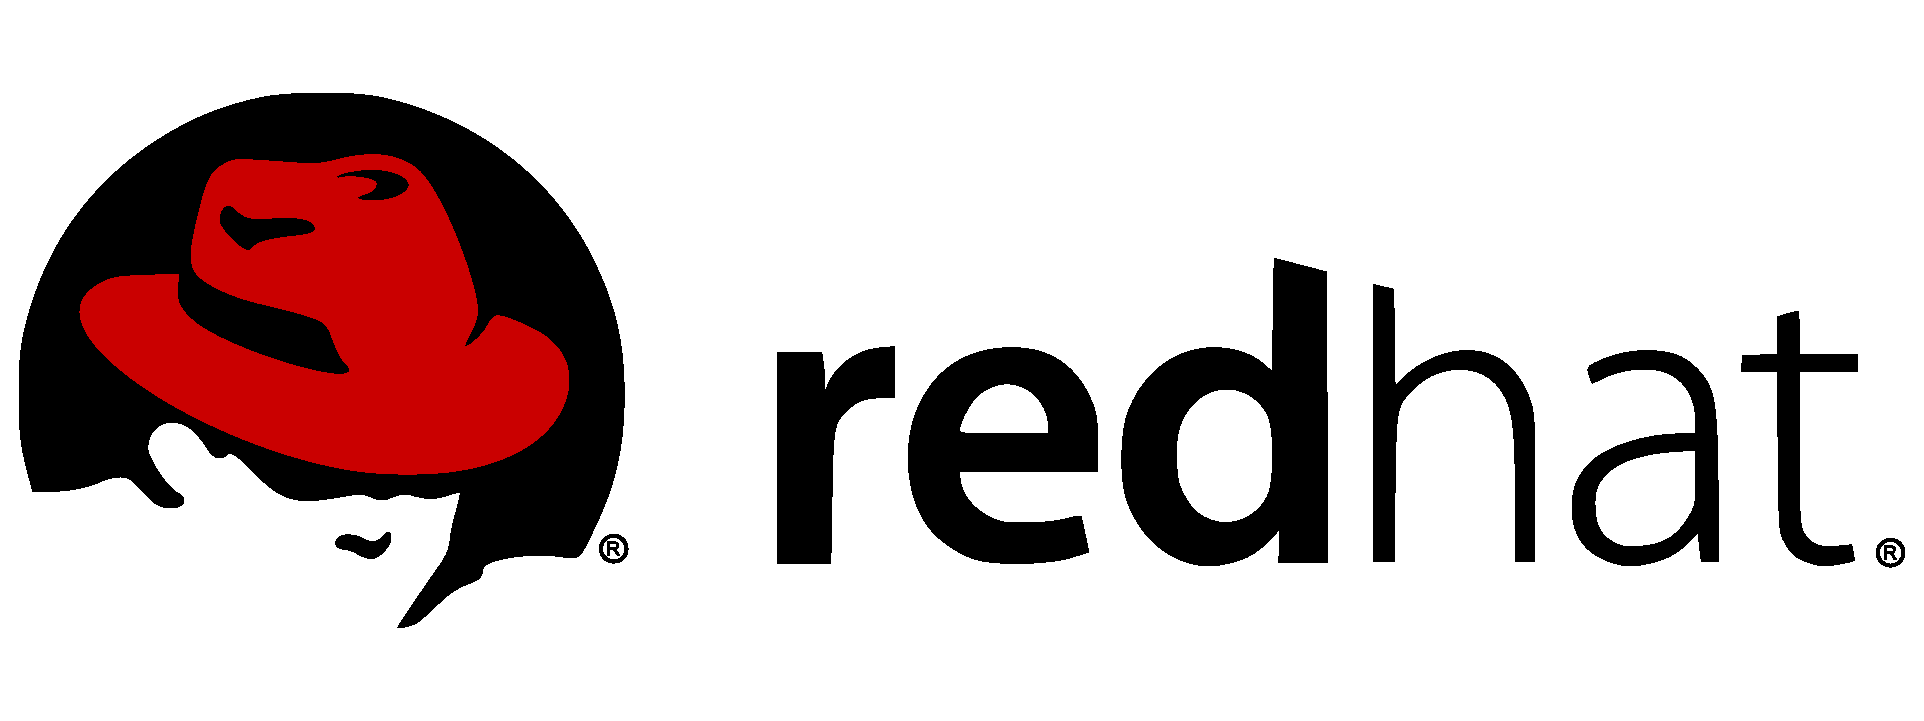 Red Linux Logo - redhat-linux-logo - Free Downloads Graphic Design Materials